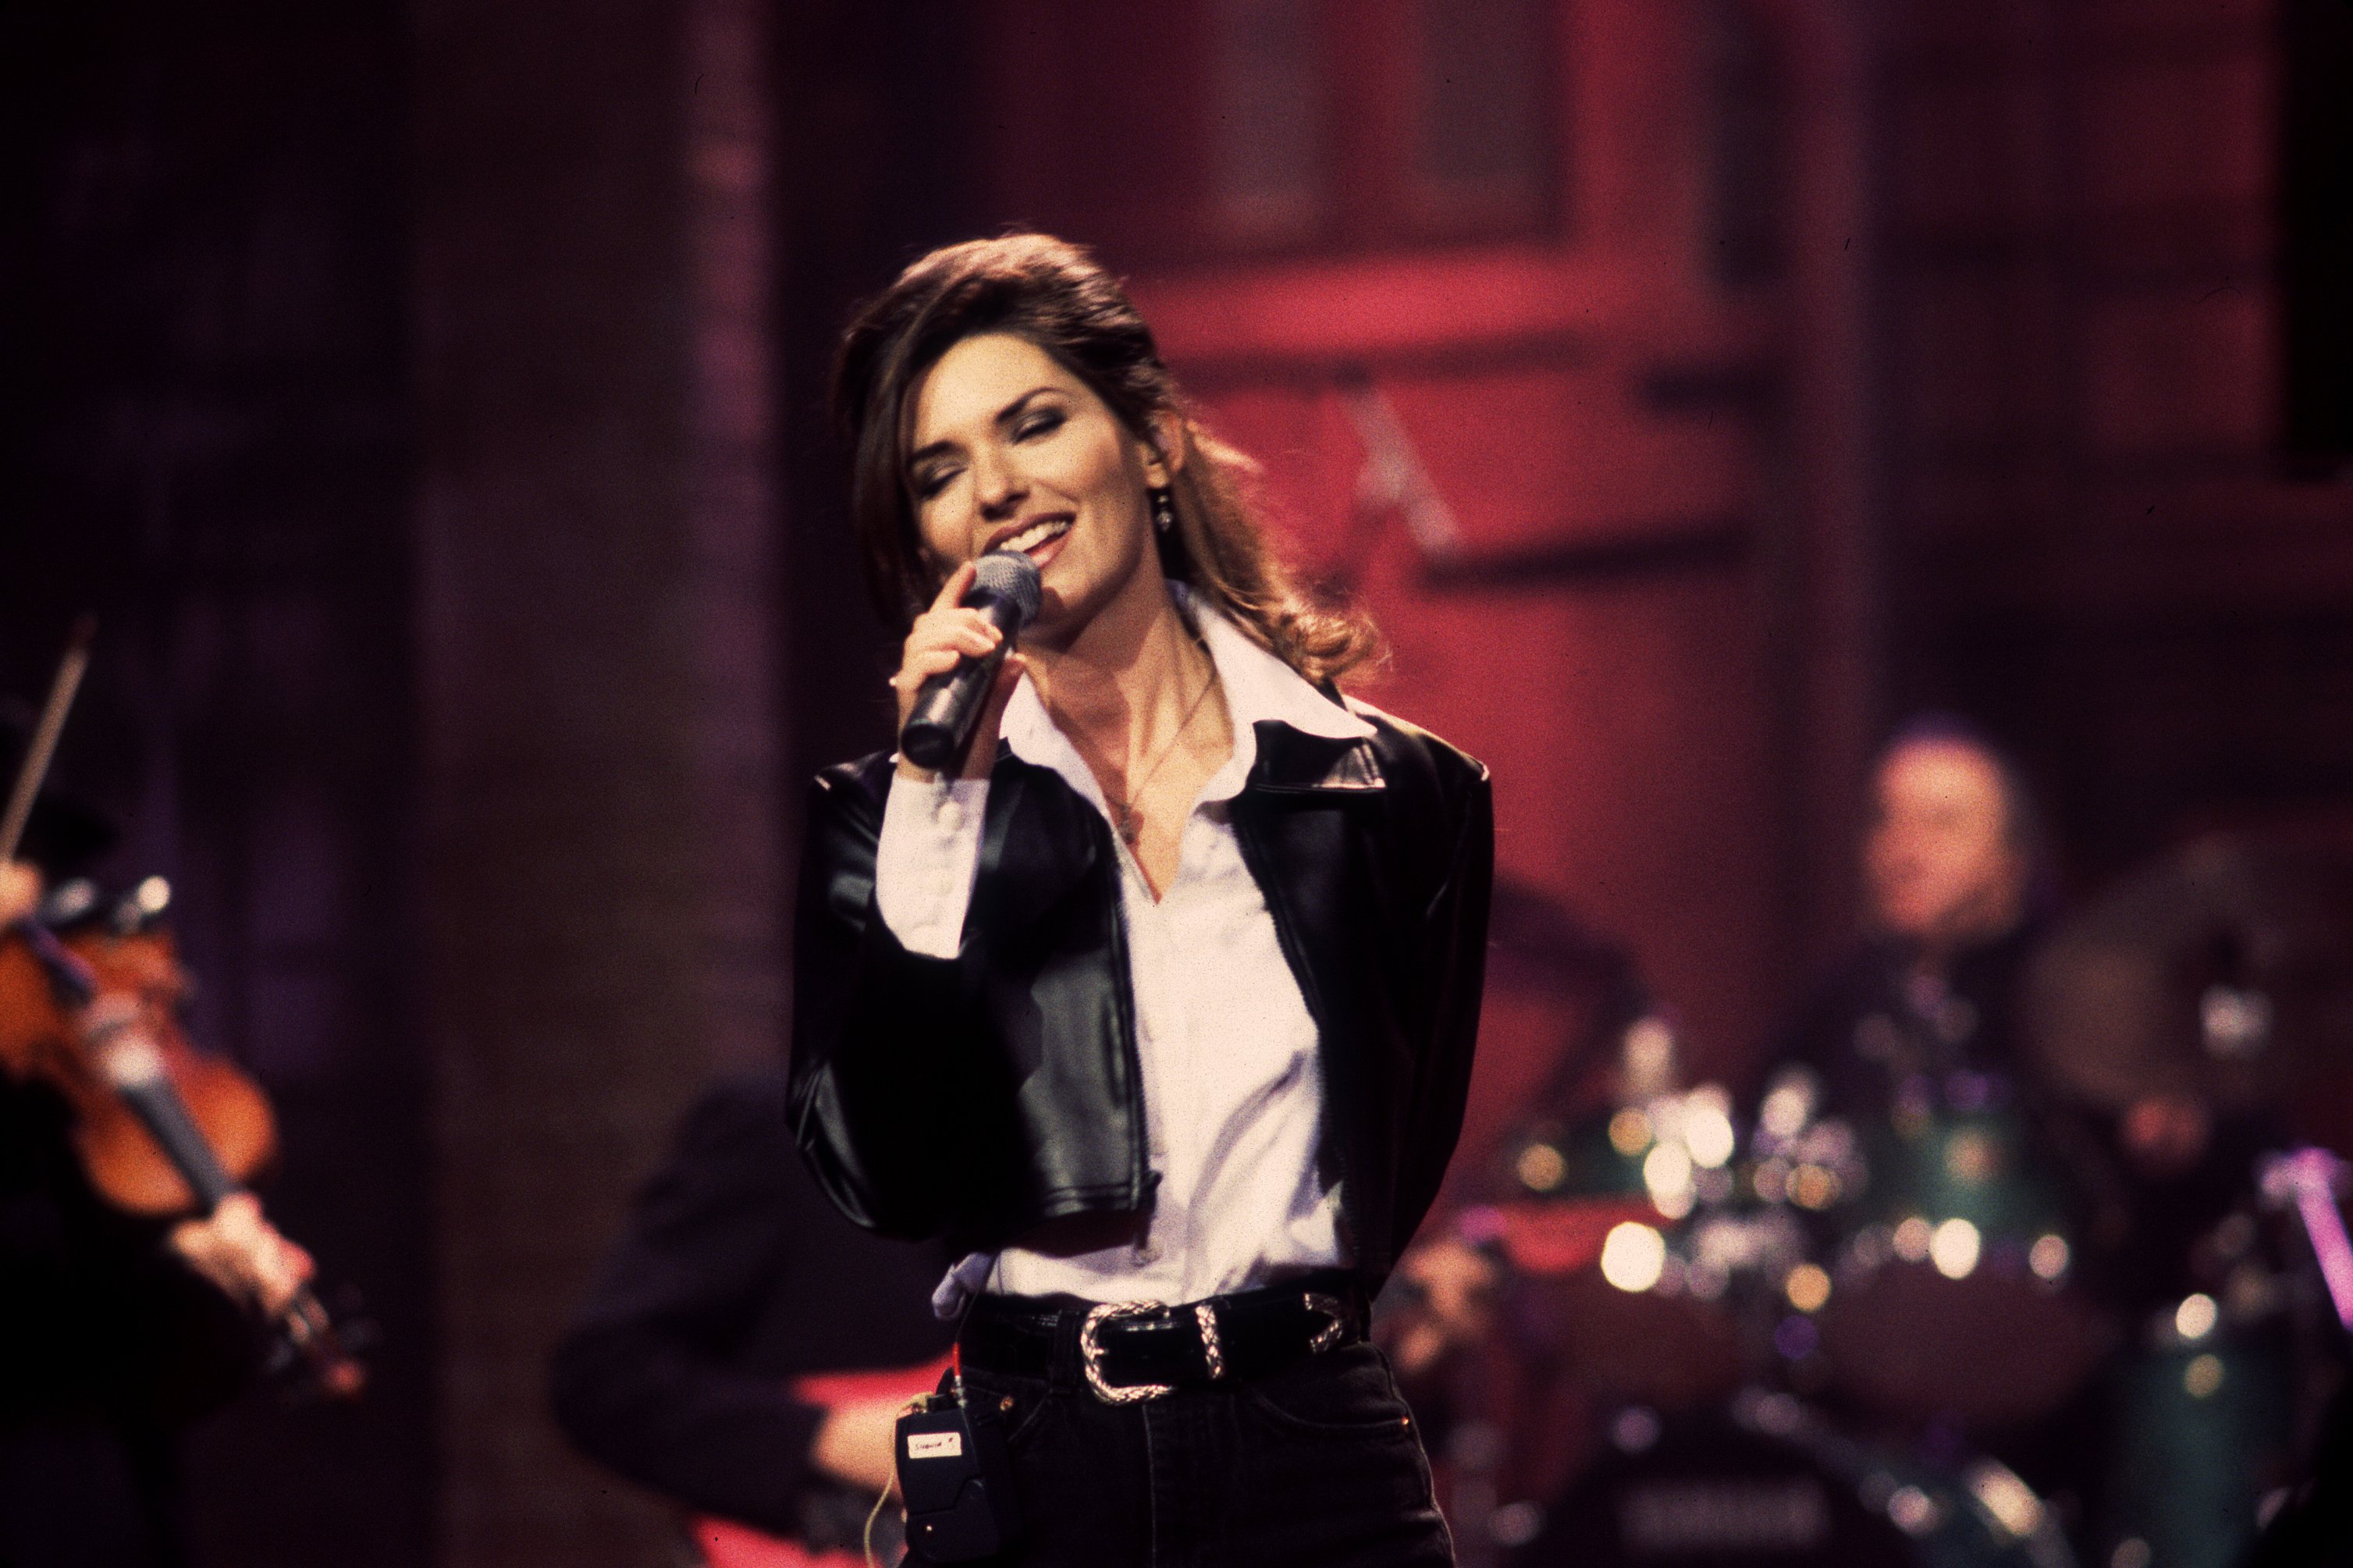 Shania Twain at soundcheck for the "David Letterman Show" on February 26, 1996, in New York City, New York. | Source: Getty Images